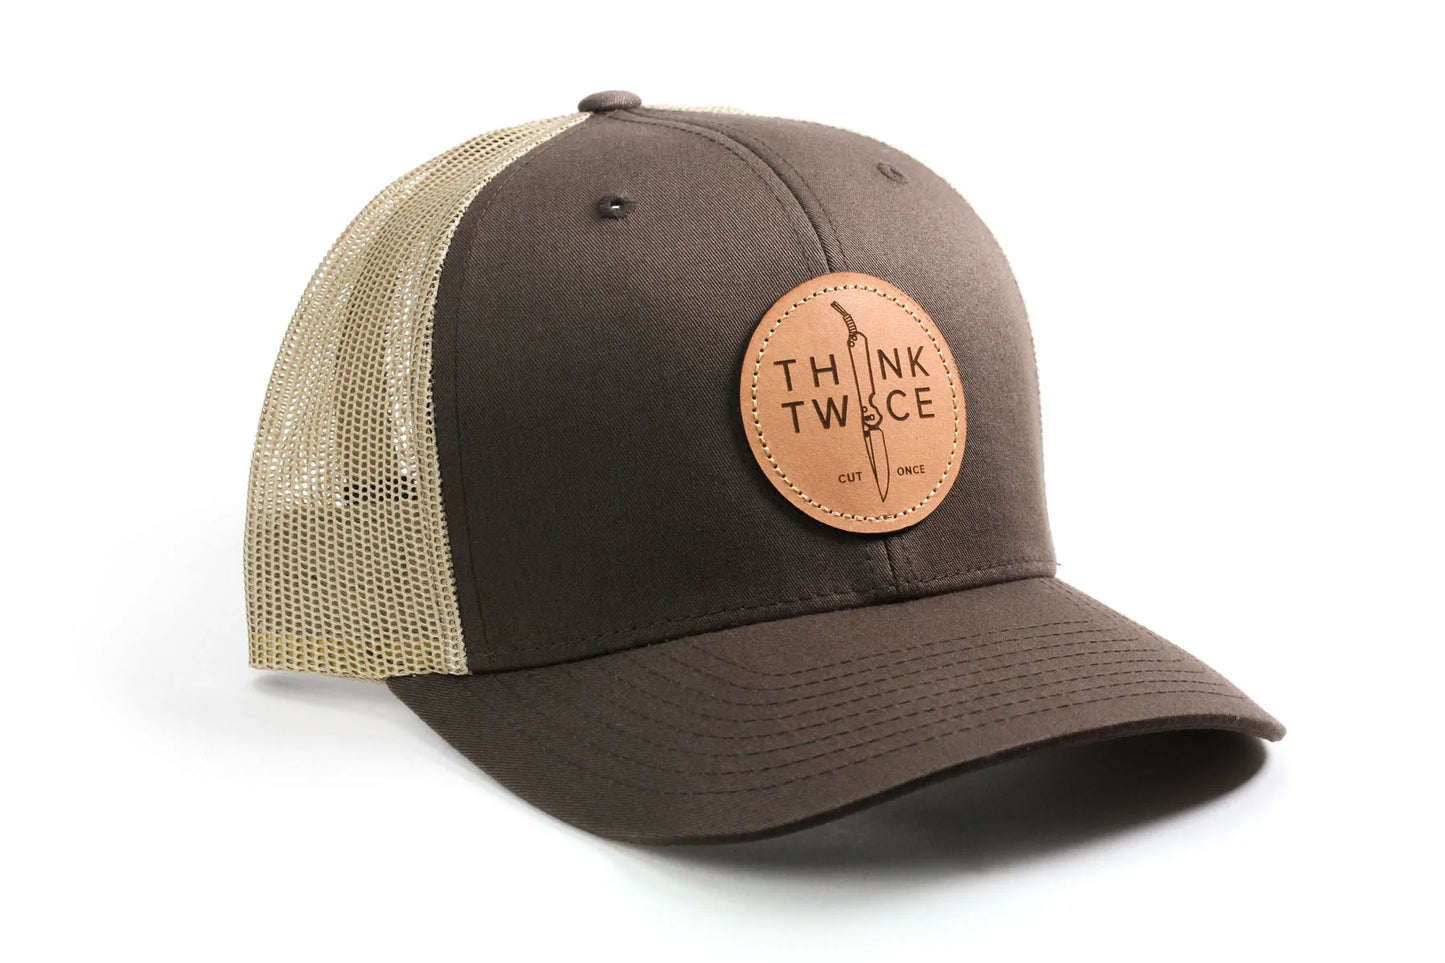 Chris Reeve CRK Favorite Trucker Hat - Canvas/Mesh with Leather Patch